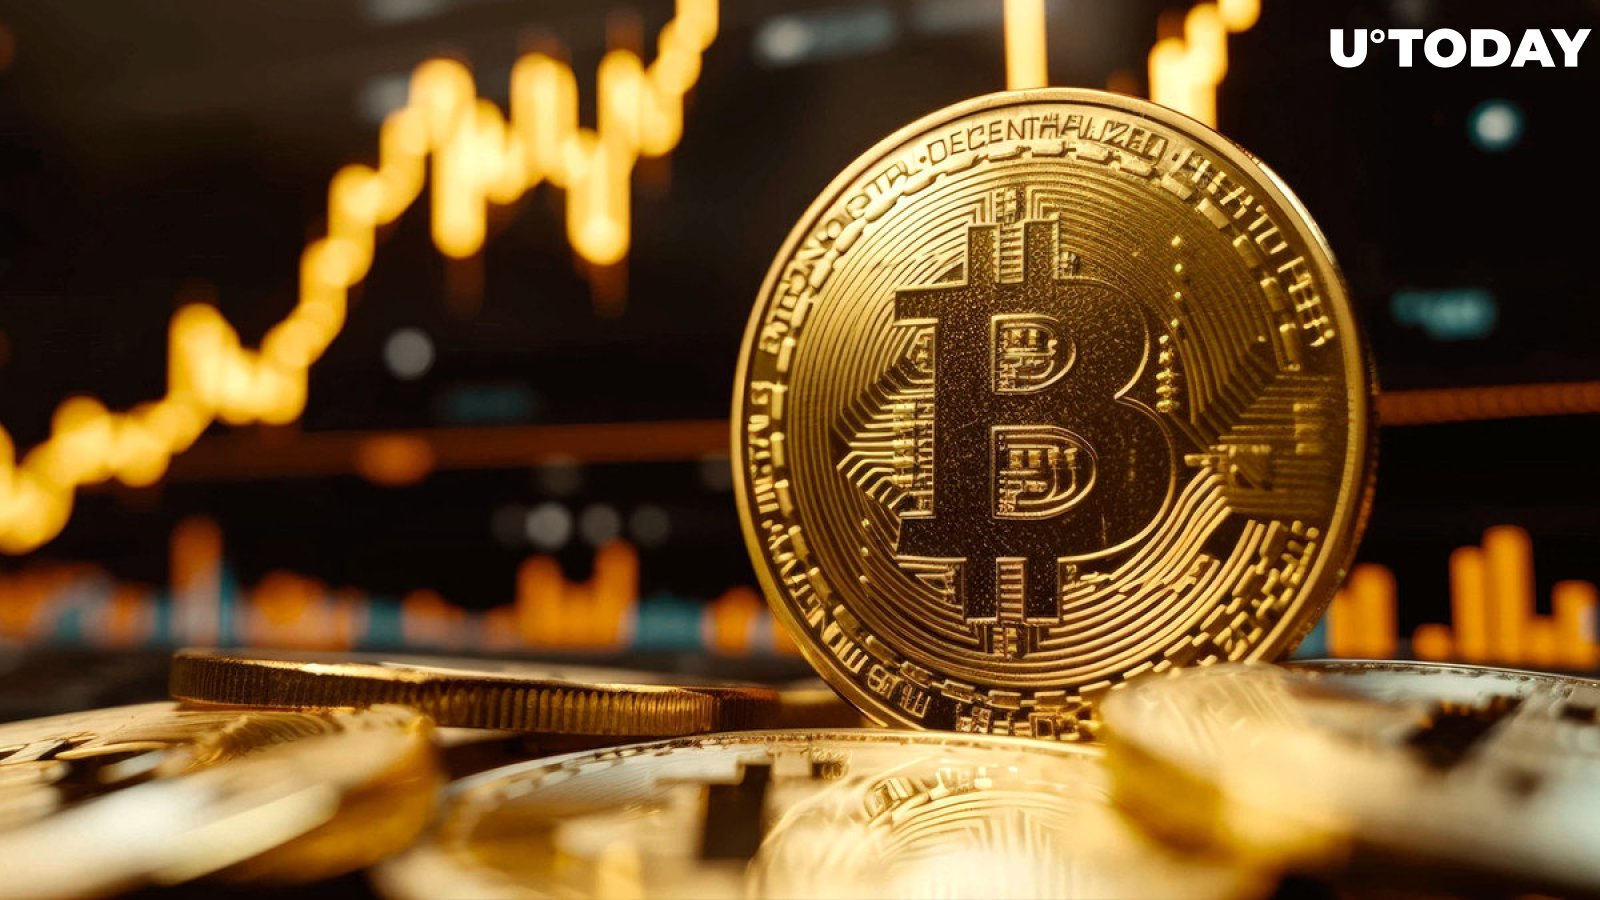 Bitcoin Skyrockets to New All-Time High in Mining Difficulty Amid Largest Increase Ever